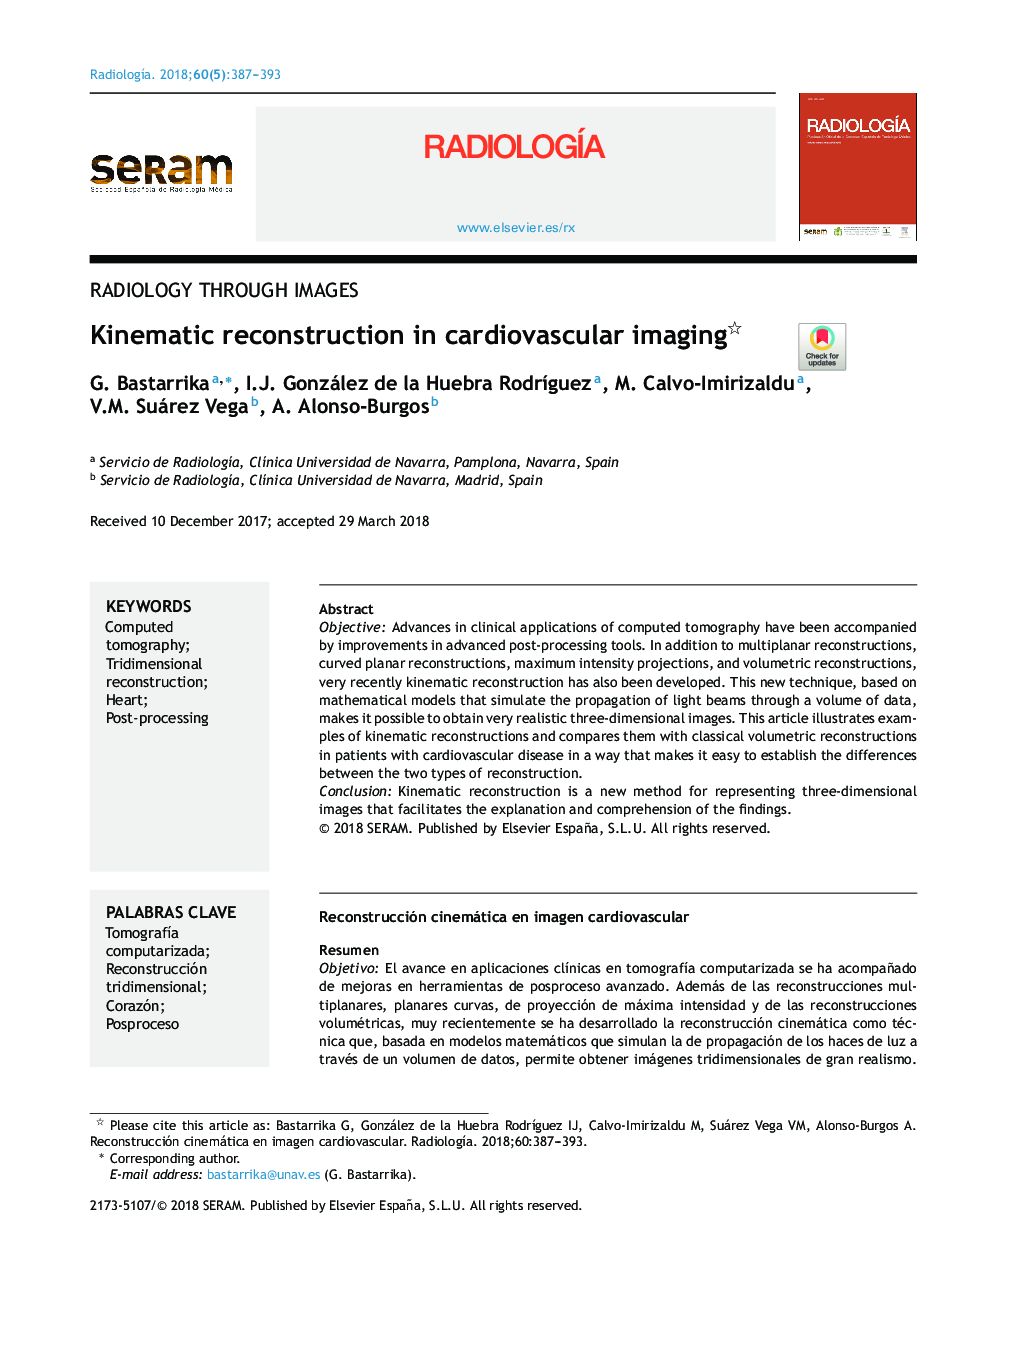 Kinematic reconstruction in cardiovascular imaging